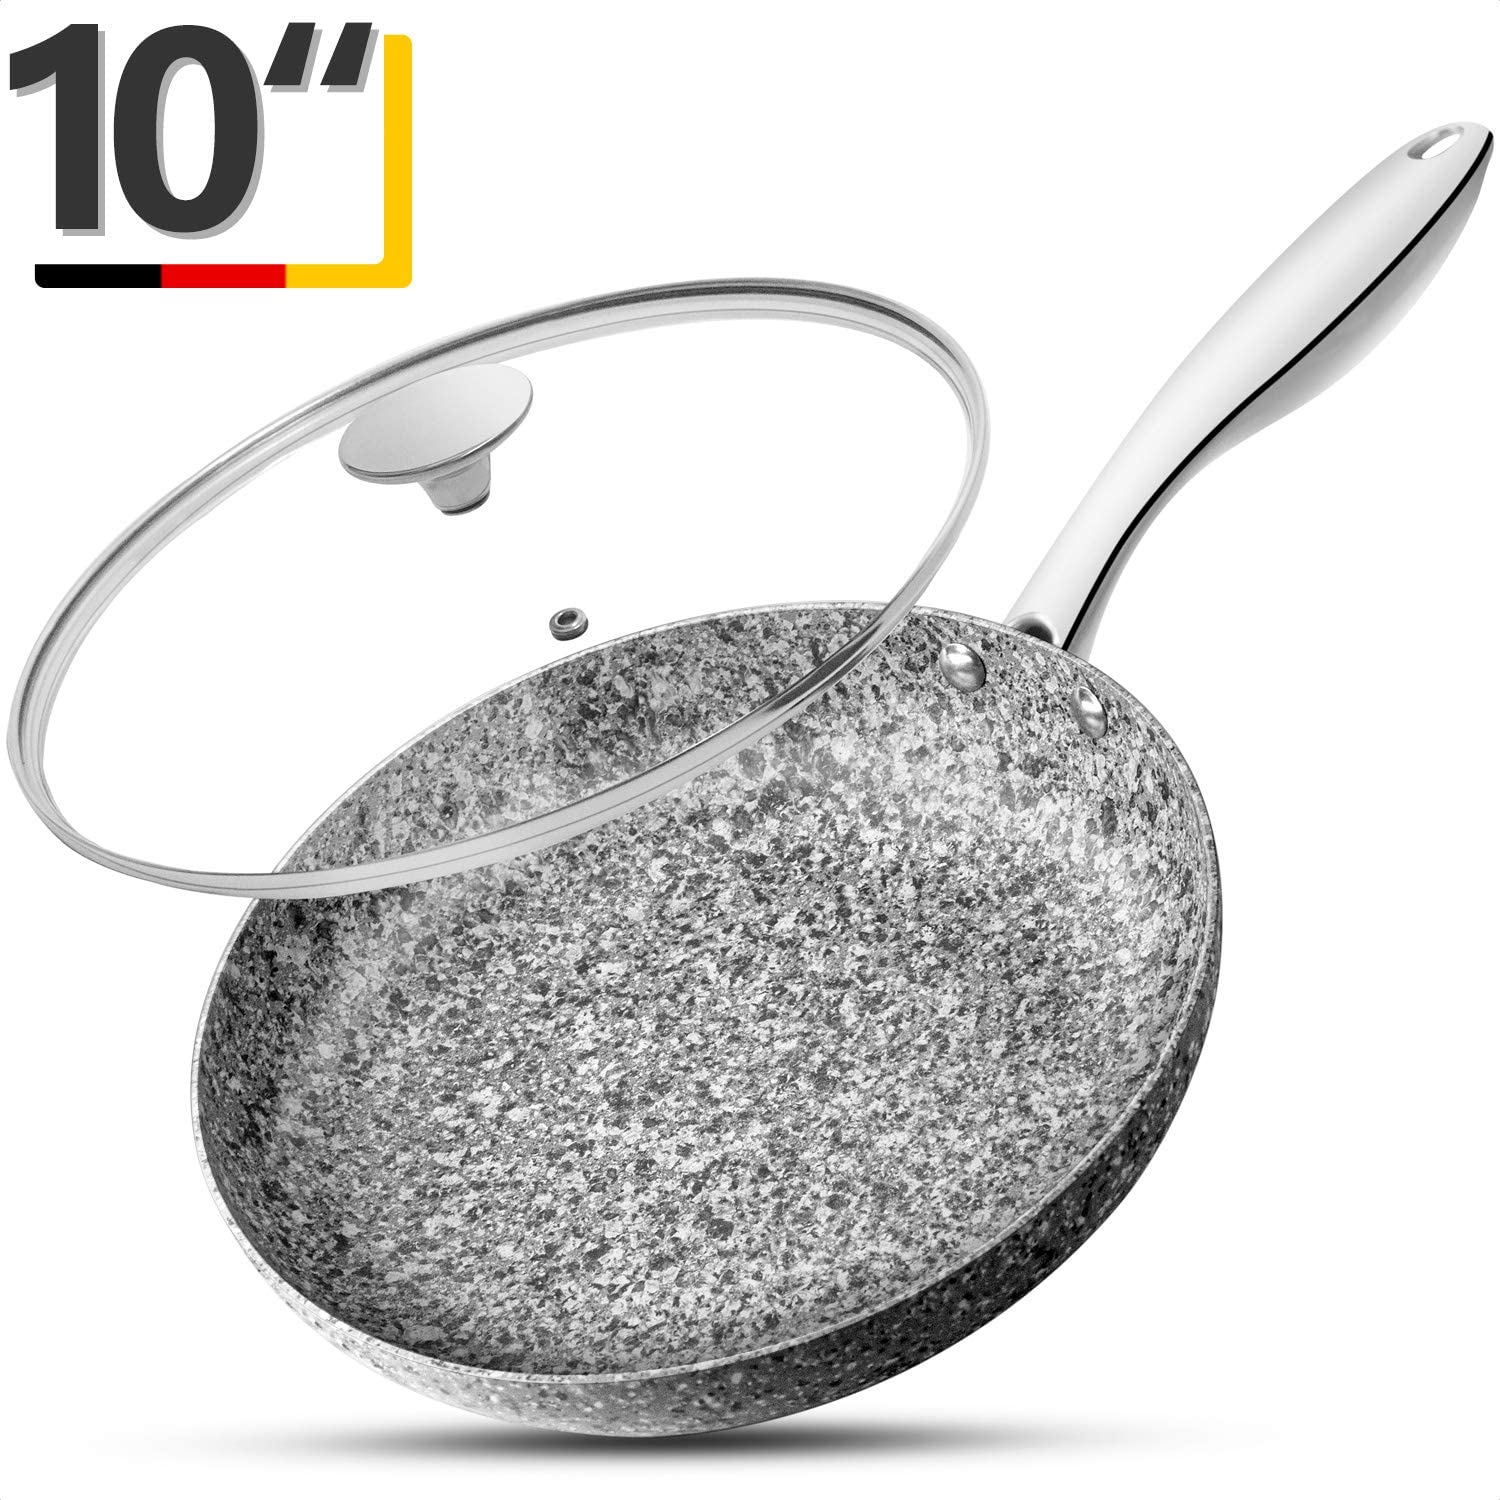 MICHELANGELO Nonstick & Non-Toxic Induction Compatible Stone Frying Pan, 10-Inch